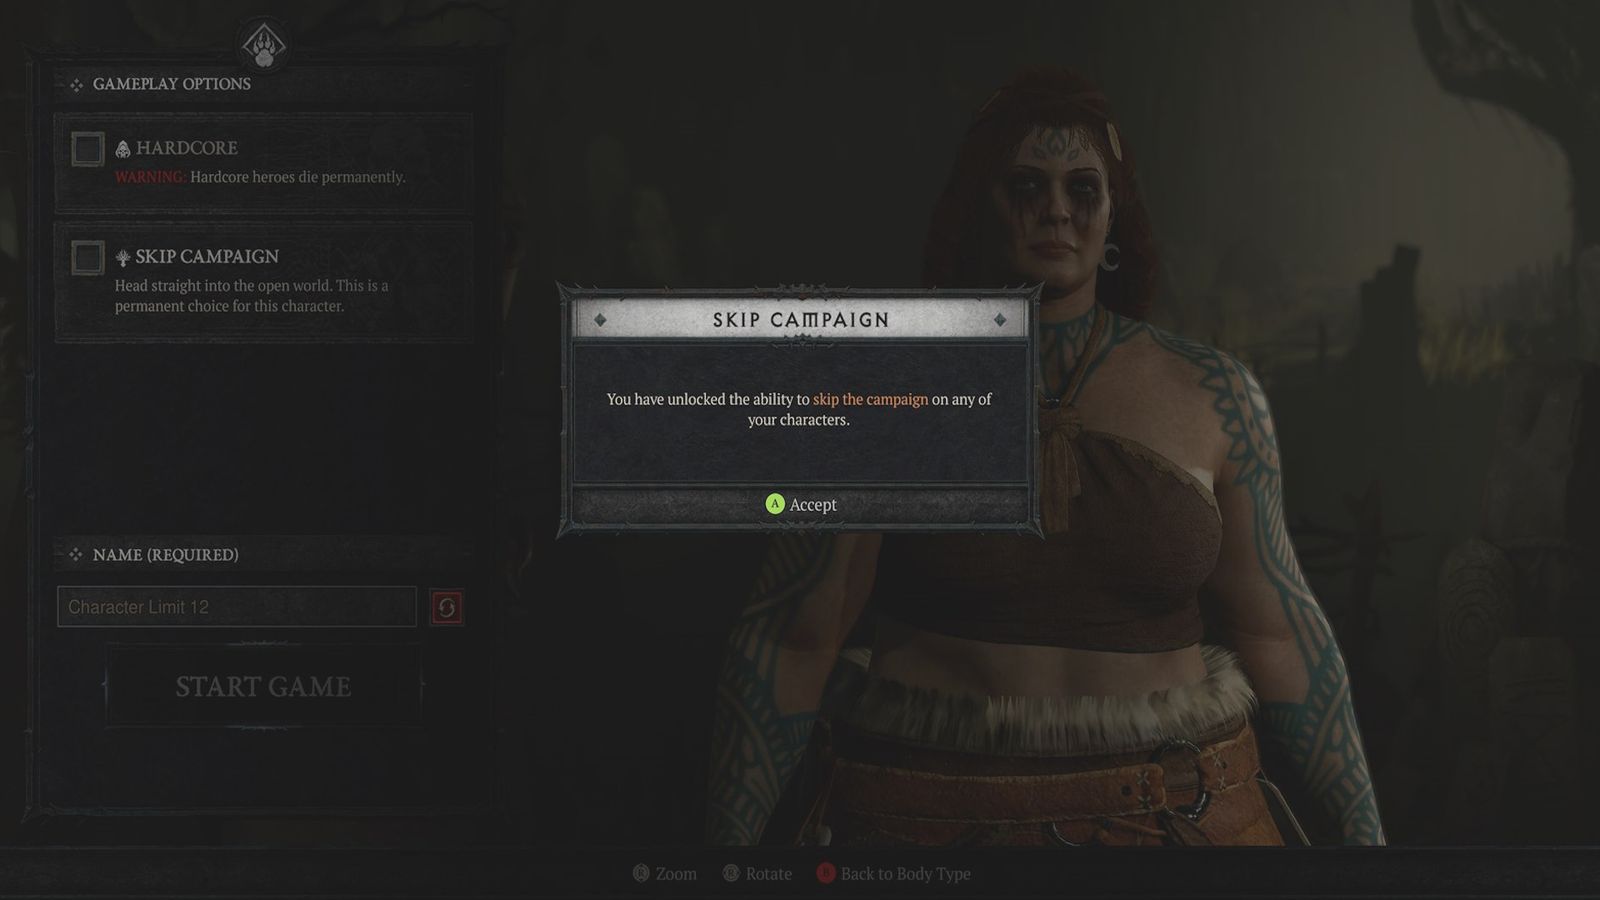 Once you make your second character or alt, you'll see an option to skip the campaign.